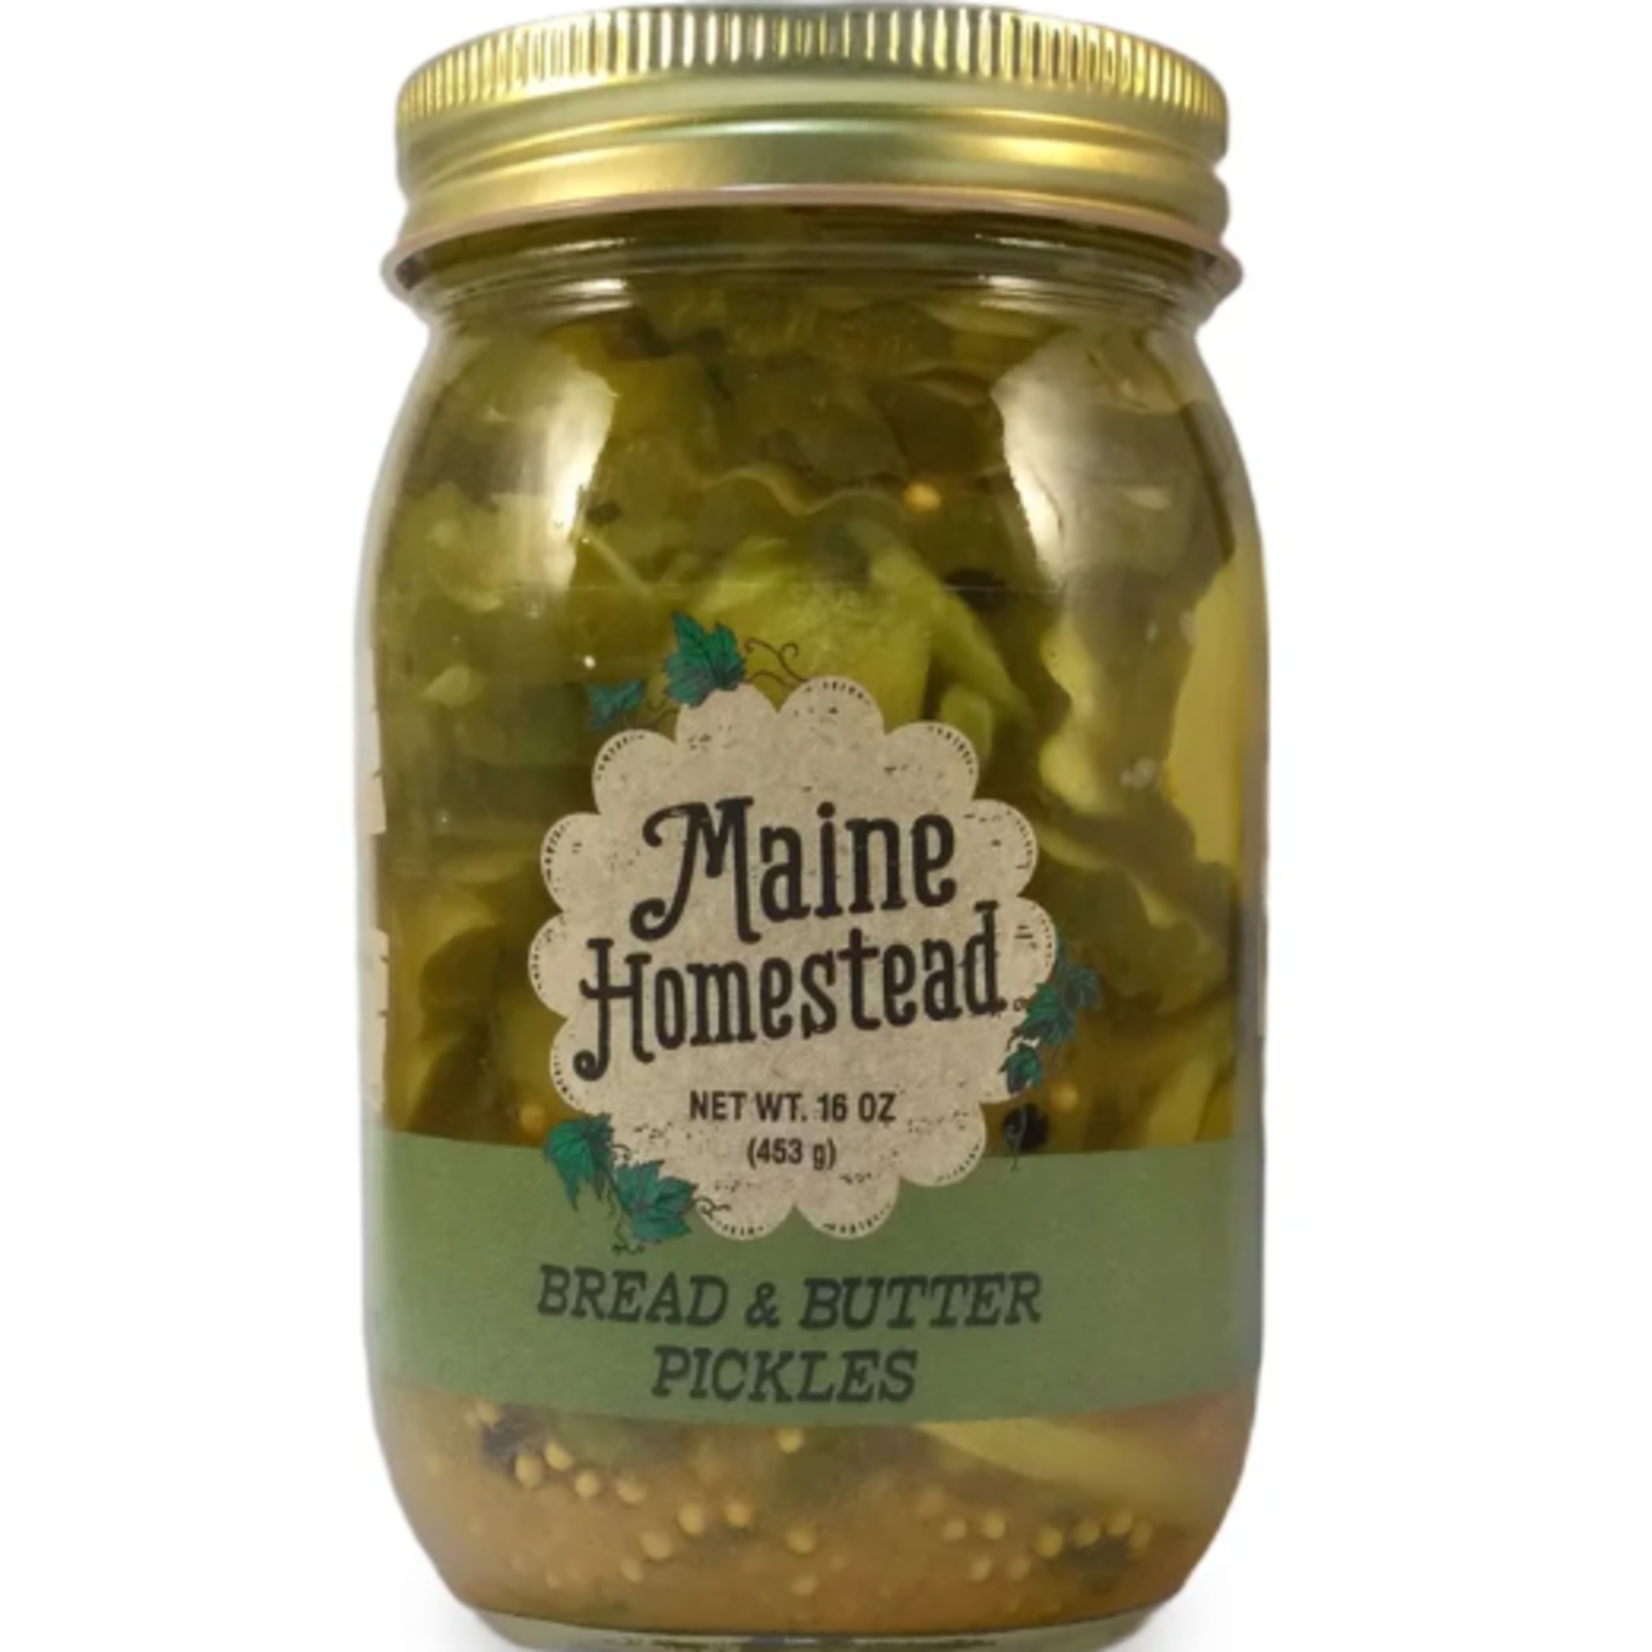 Maine Homestead Pickles Bread & Butter 16oz